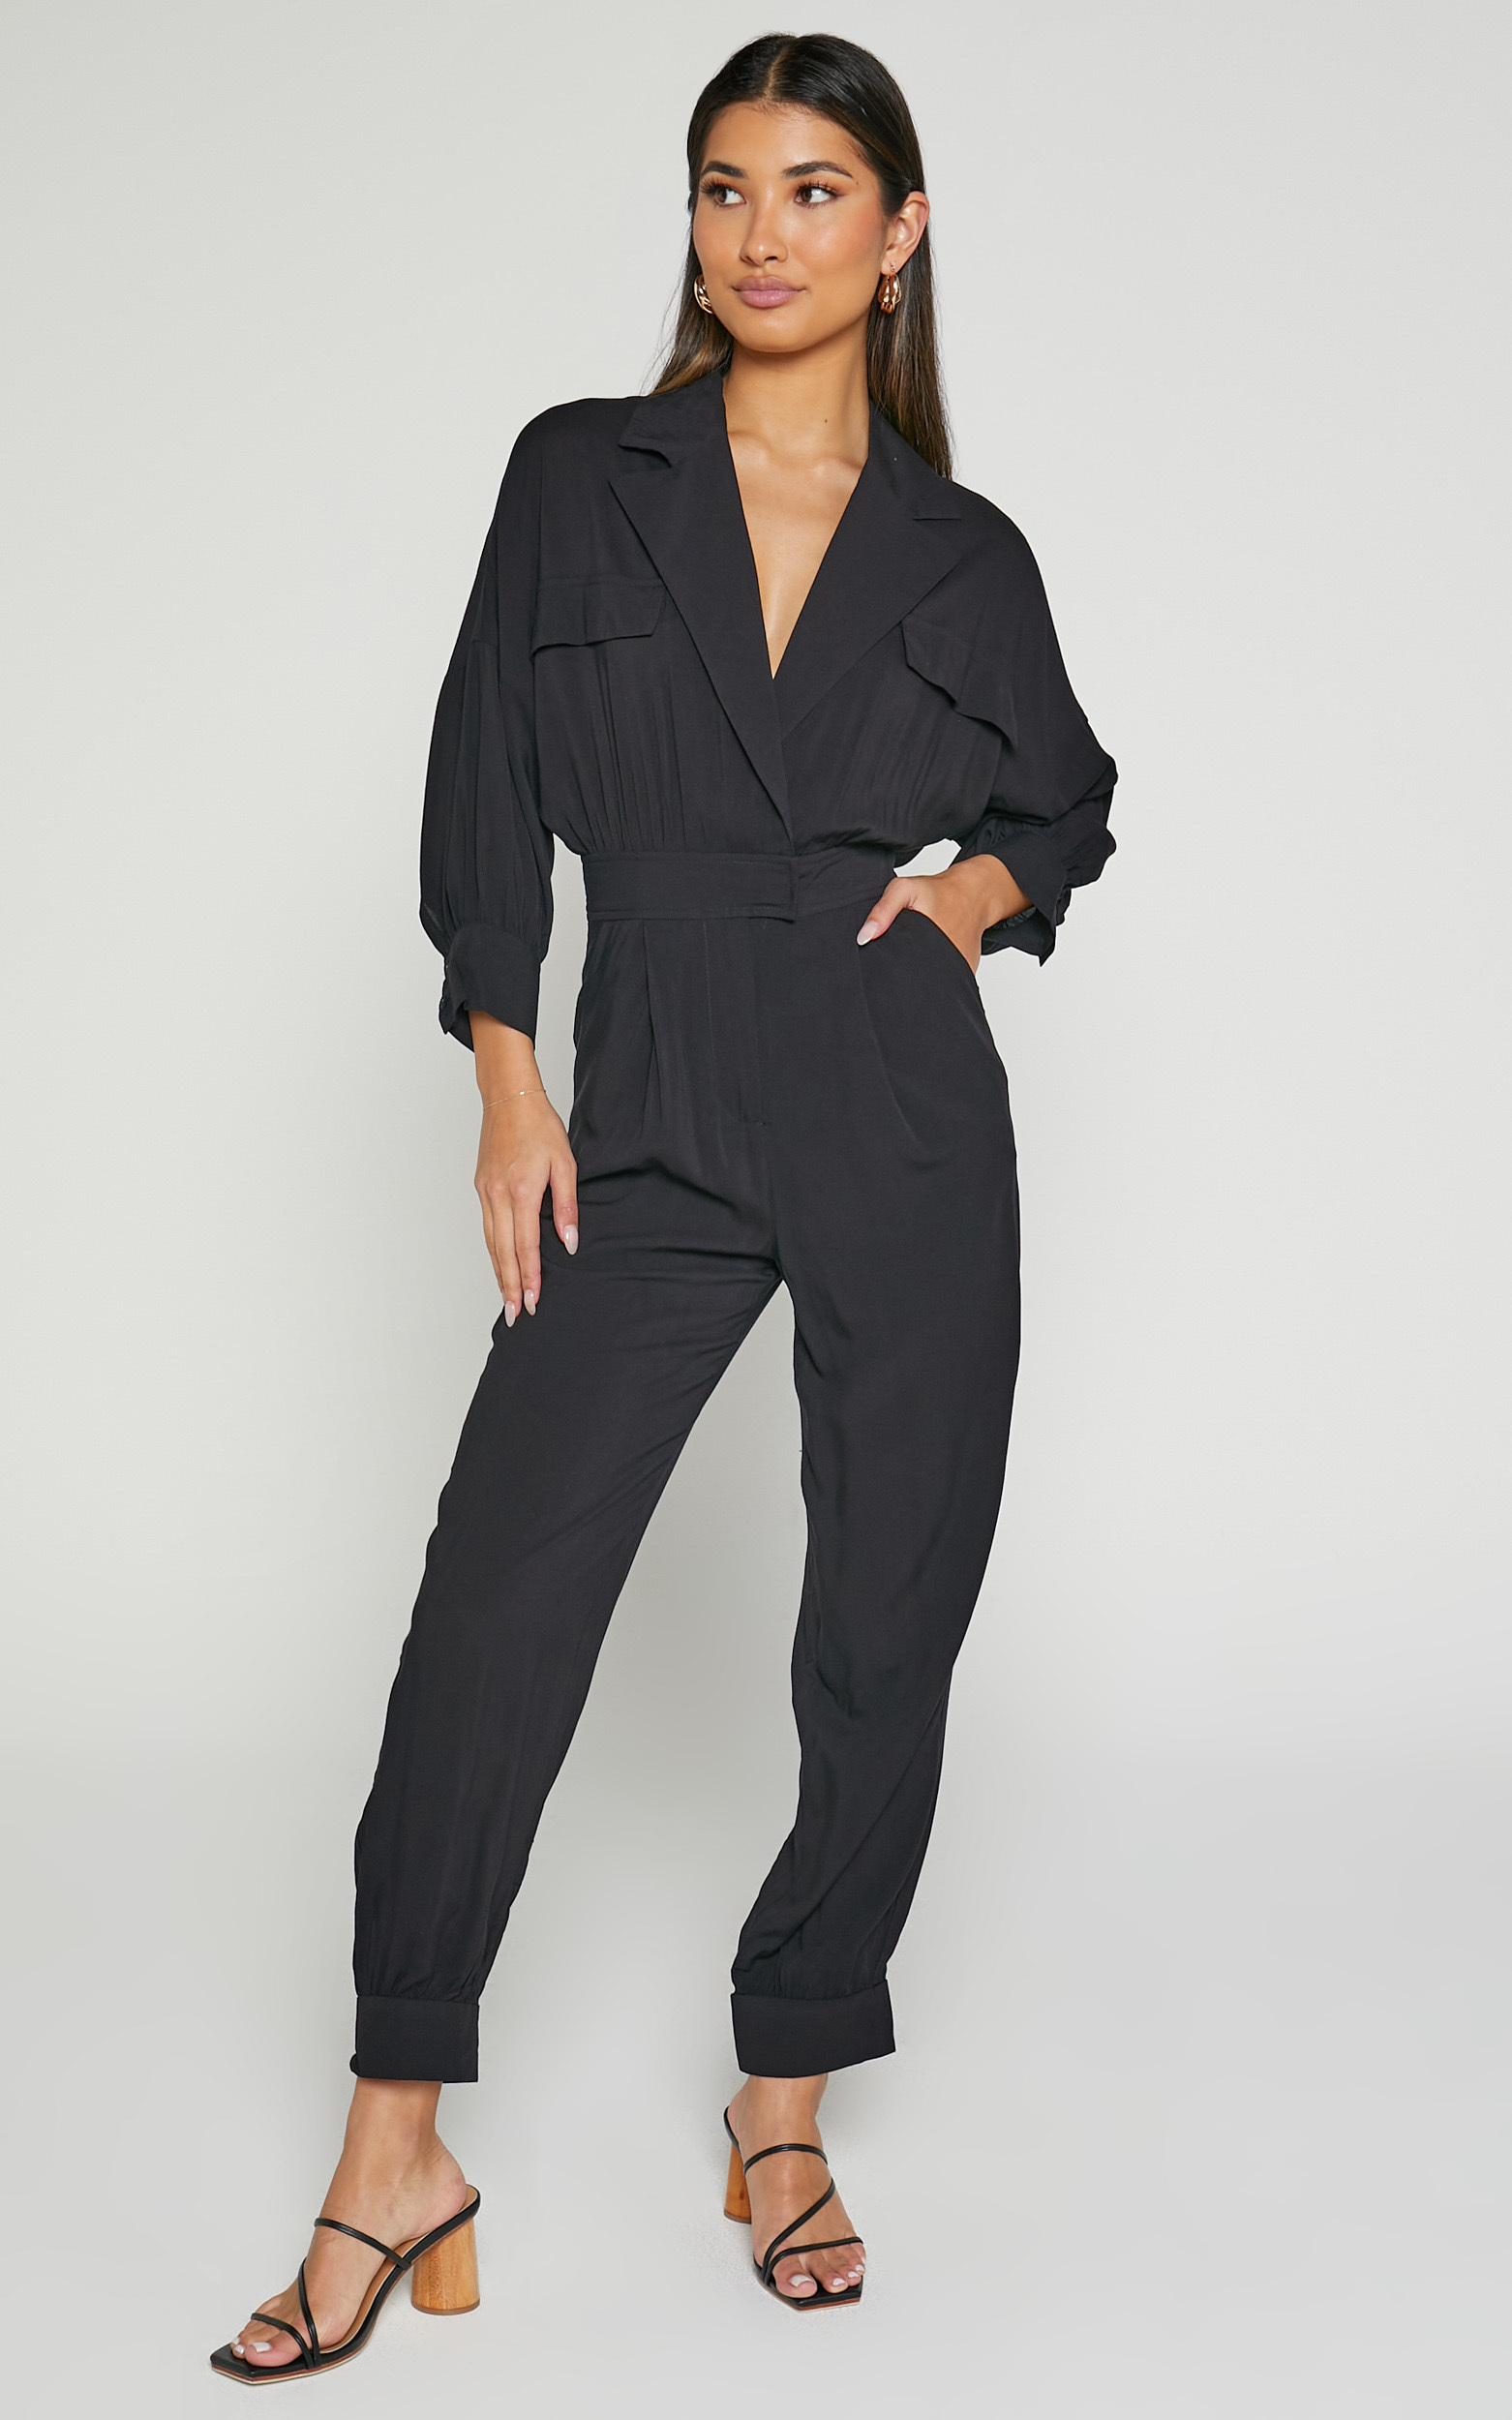 Ayelin Jumpsuit - Relaxed 3/4 Sleeve Jumpsuit in Black - 06, BLK1, hi-res image number null